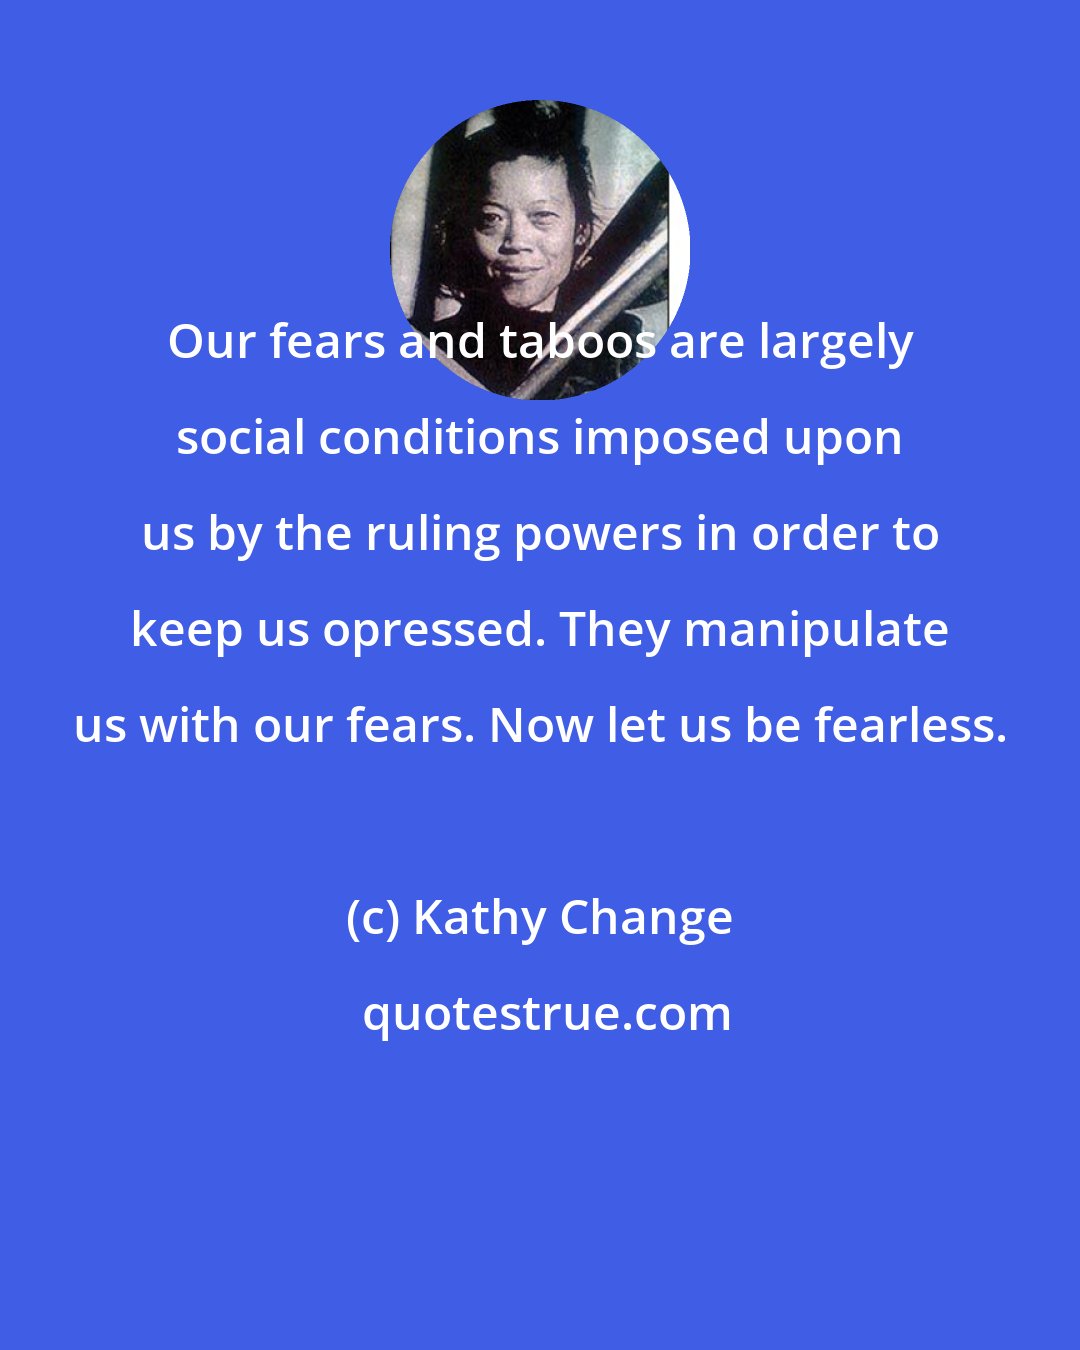 Kathy Change: Our fears and taboos are largely social conditions imposed upon us by the ruling powers in order to keep us opressed. They manipulate us with our fears. Now let us be fearless.